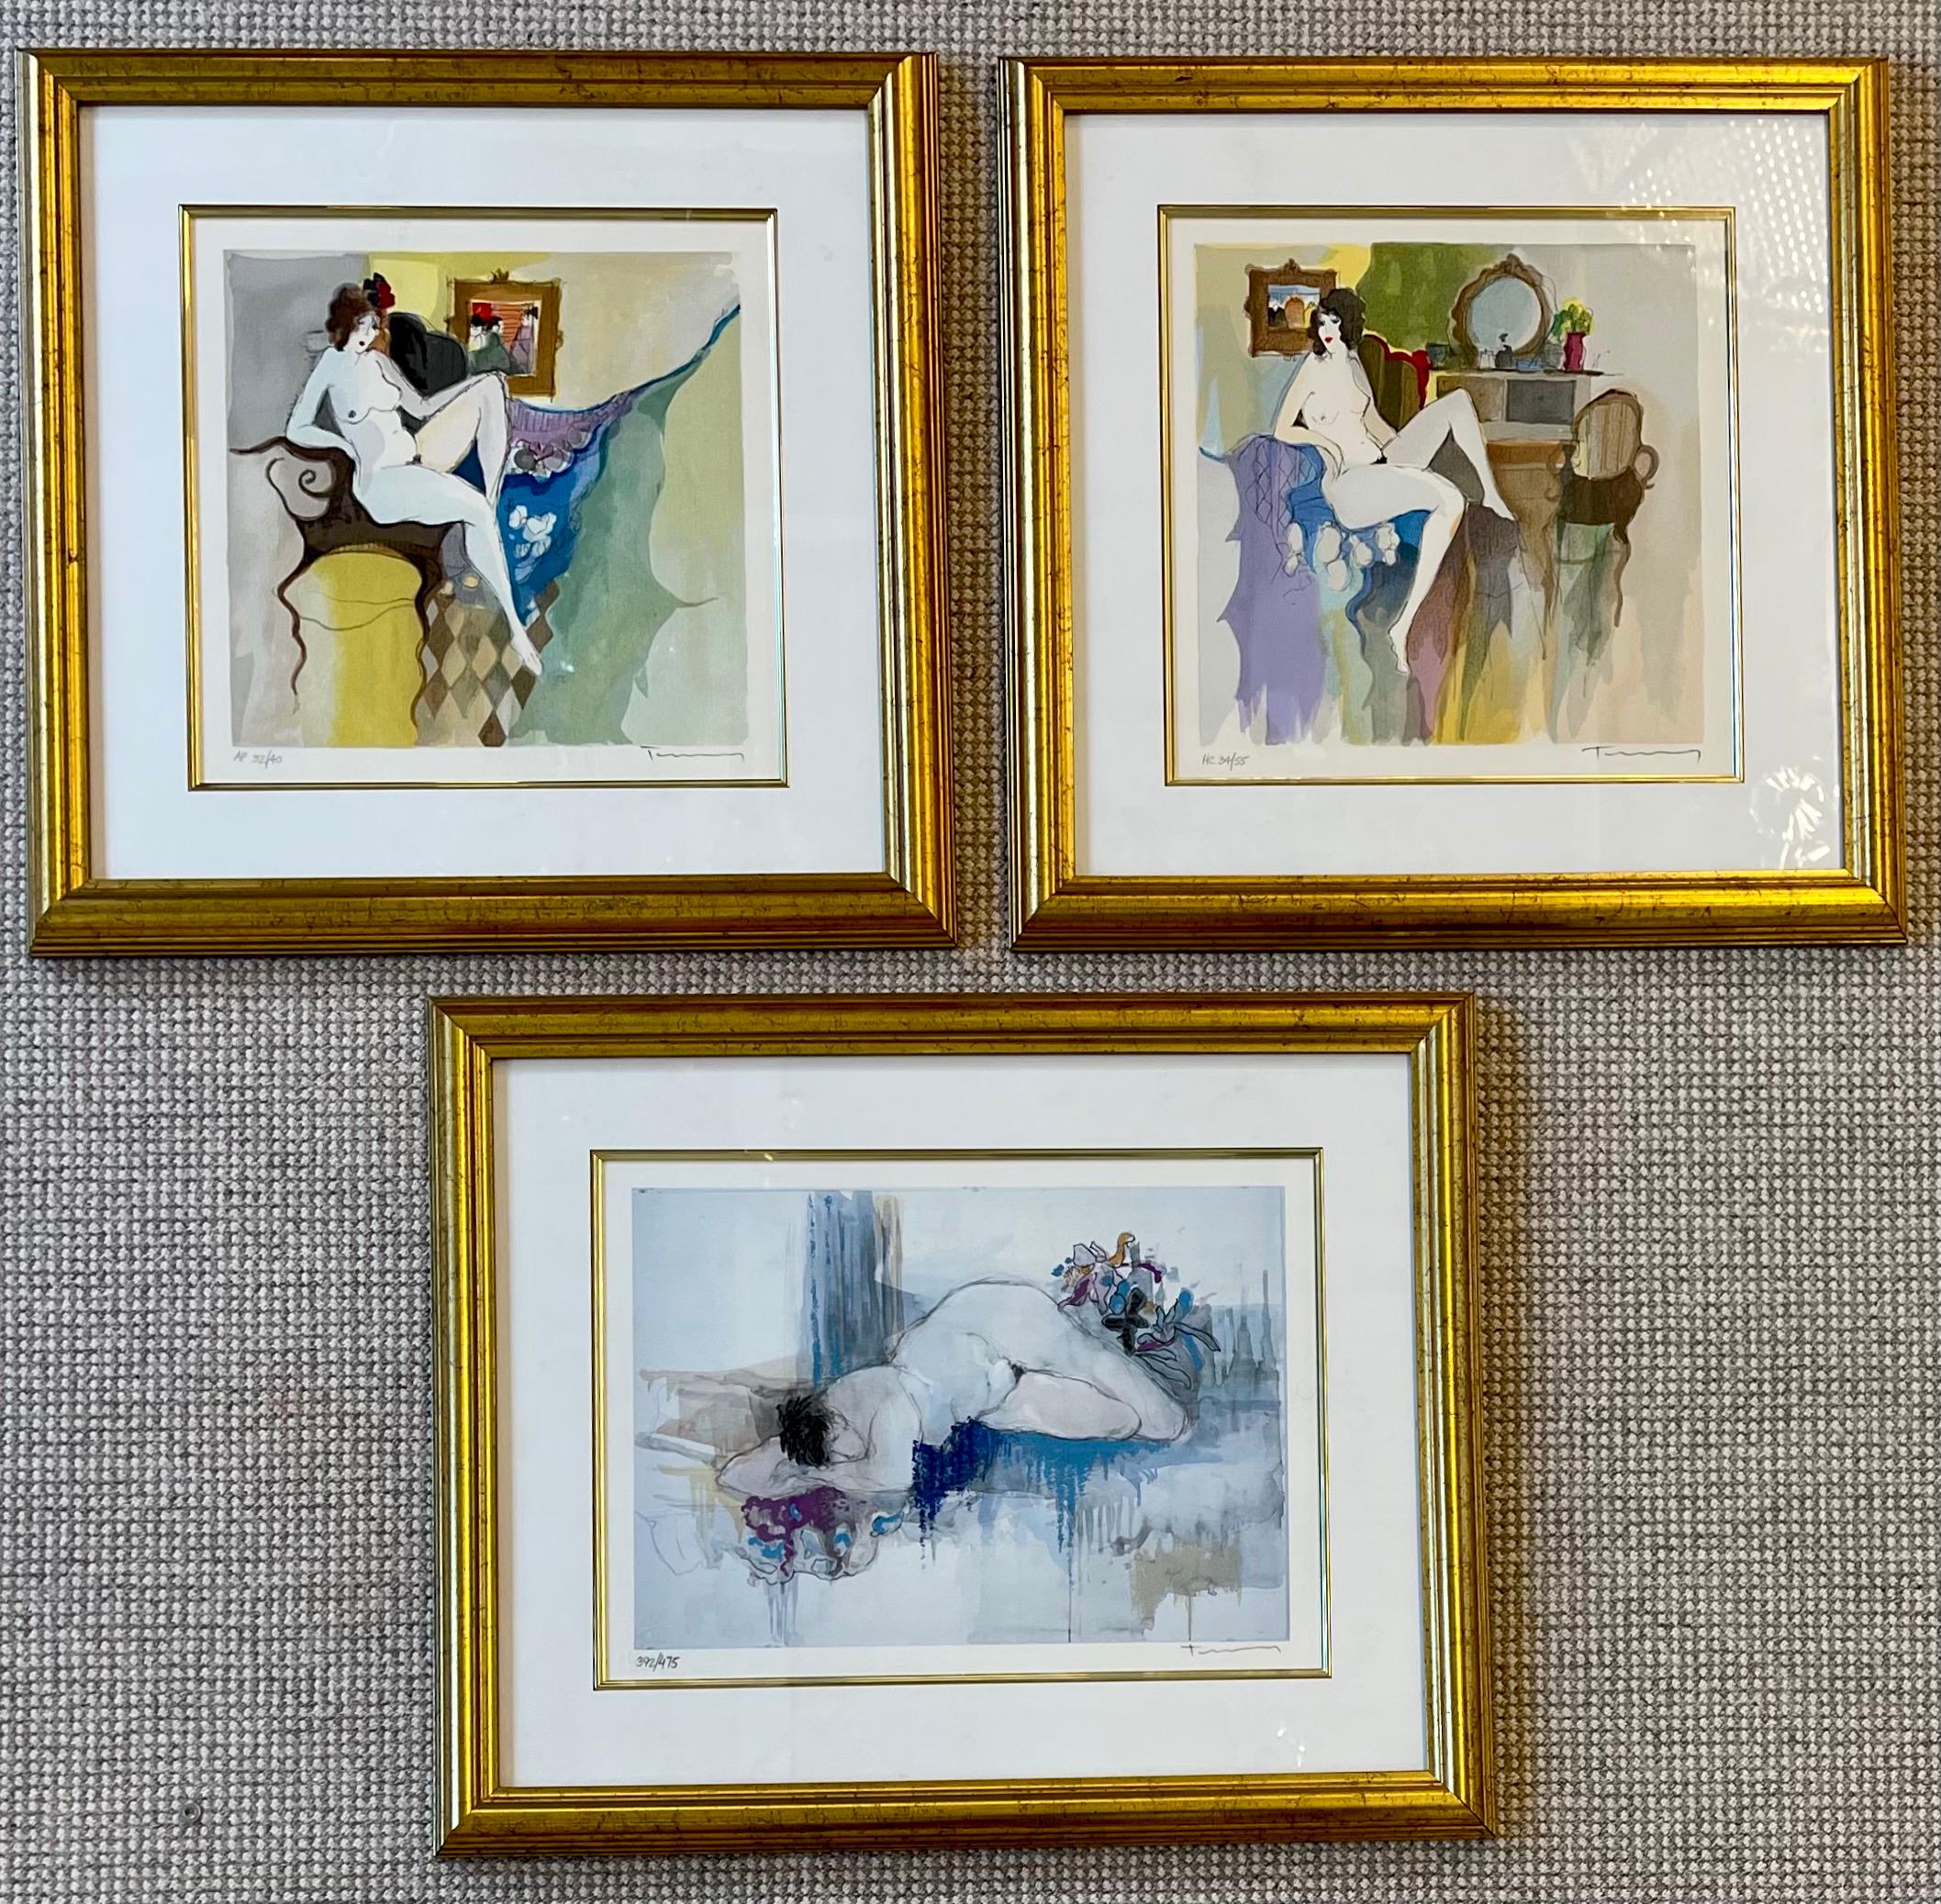 Set of three Itzchak Tarkay serigraphs of nudes. Each By Itzchak Tarkay who was born in 1935 at the Yugoslav-Hungarian border all are finely framed and can be sold as a set of individually for a cost of $600 for one. Framed, signed and